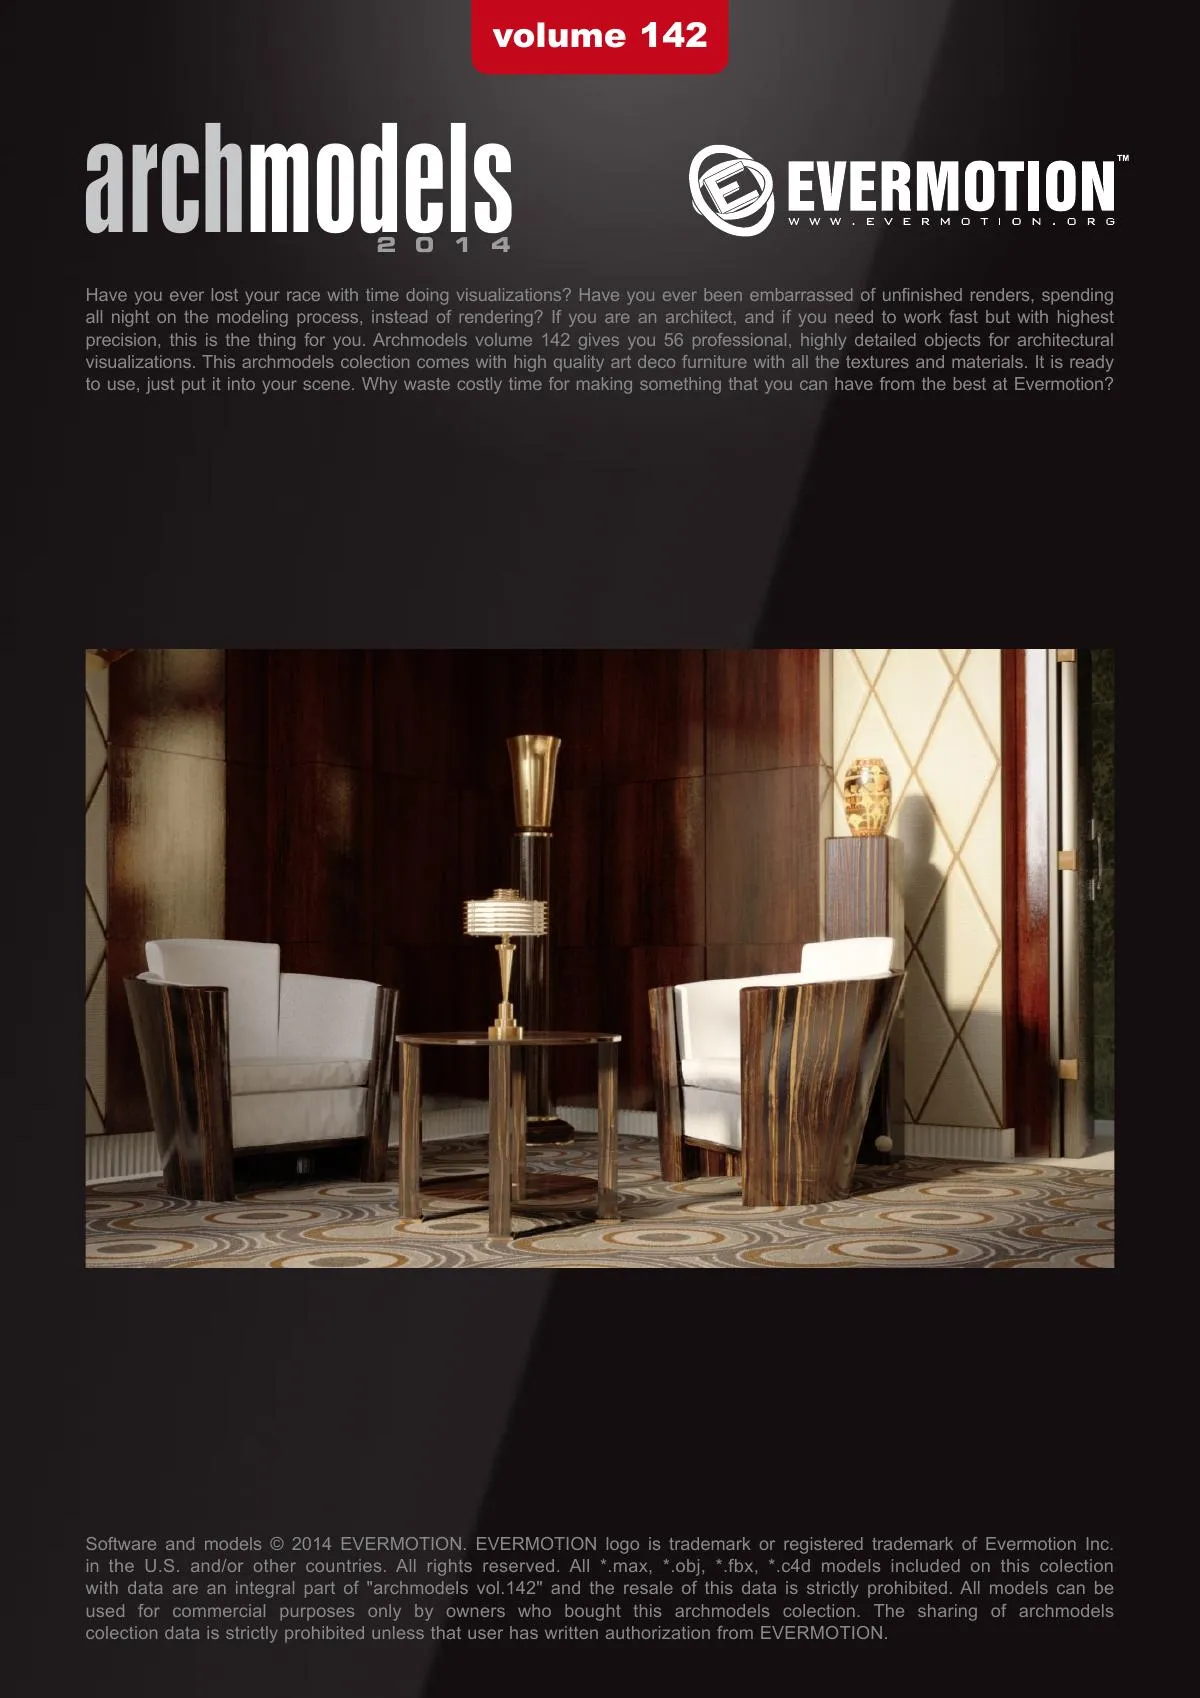 Evermotion Archmodels Vol 142 [furniture]